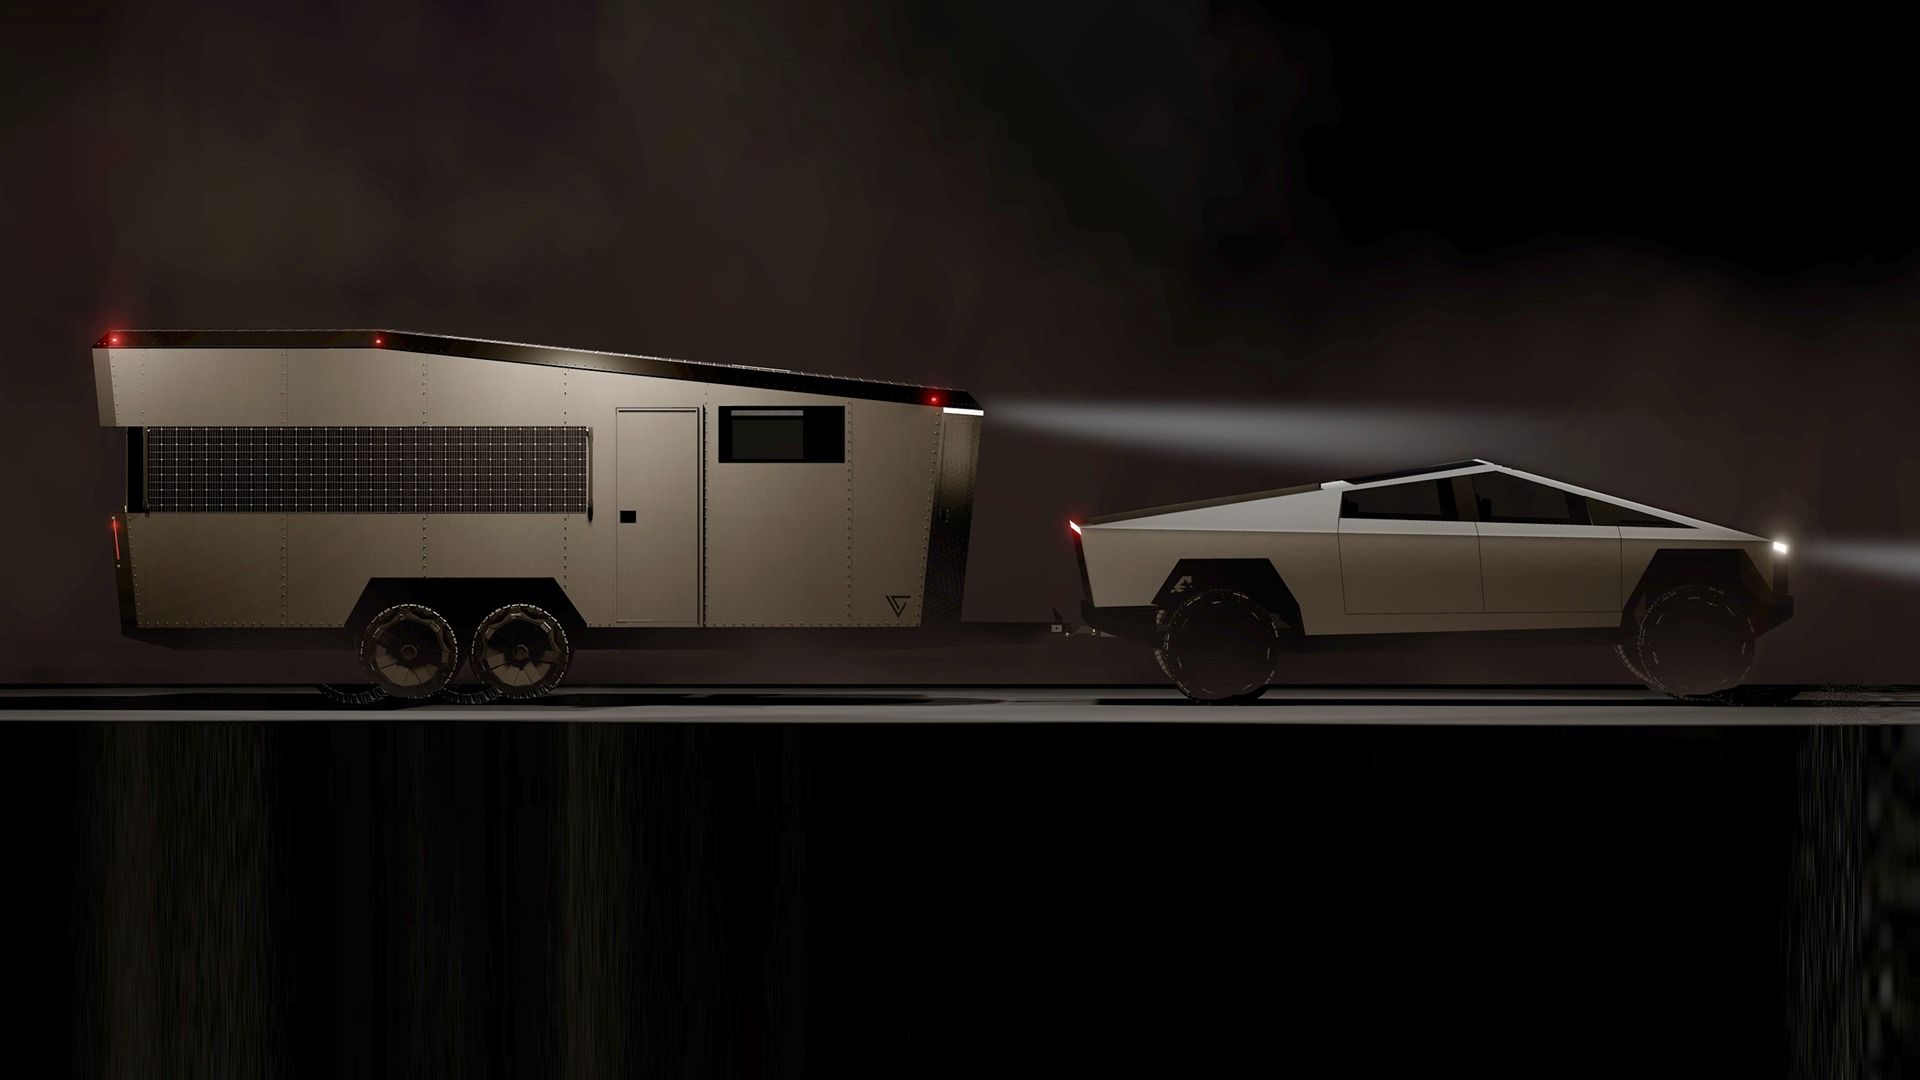 The CyberTrailer Camper Is The Perfect $175,000 Accessory To Match Your Tesla Cybertruck